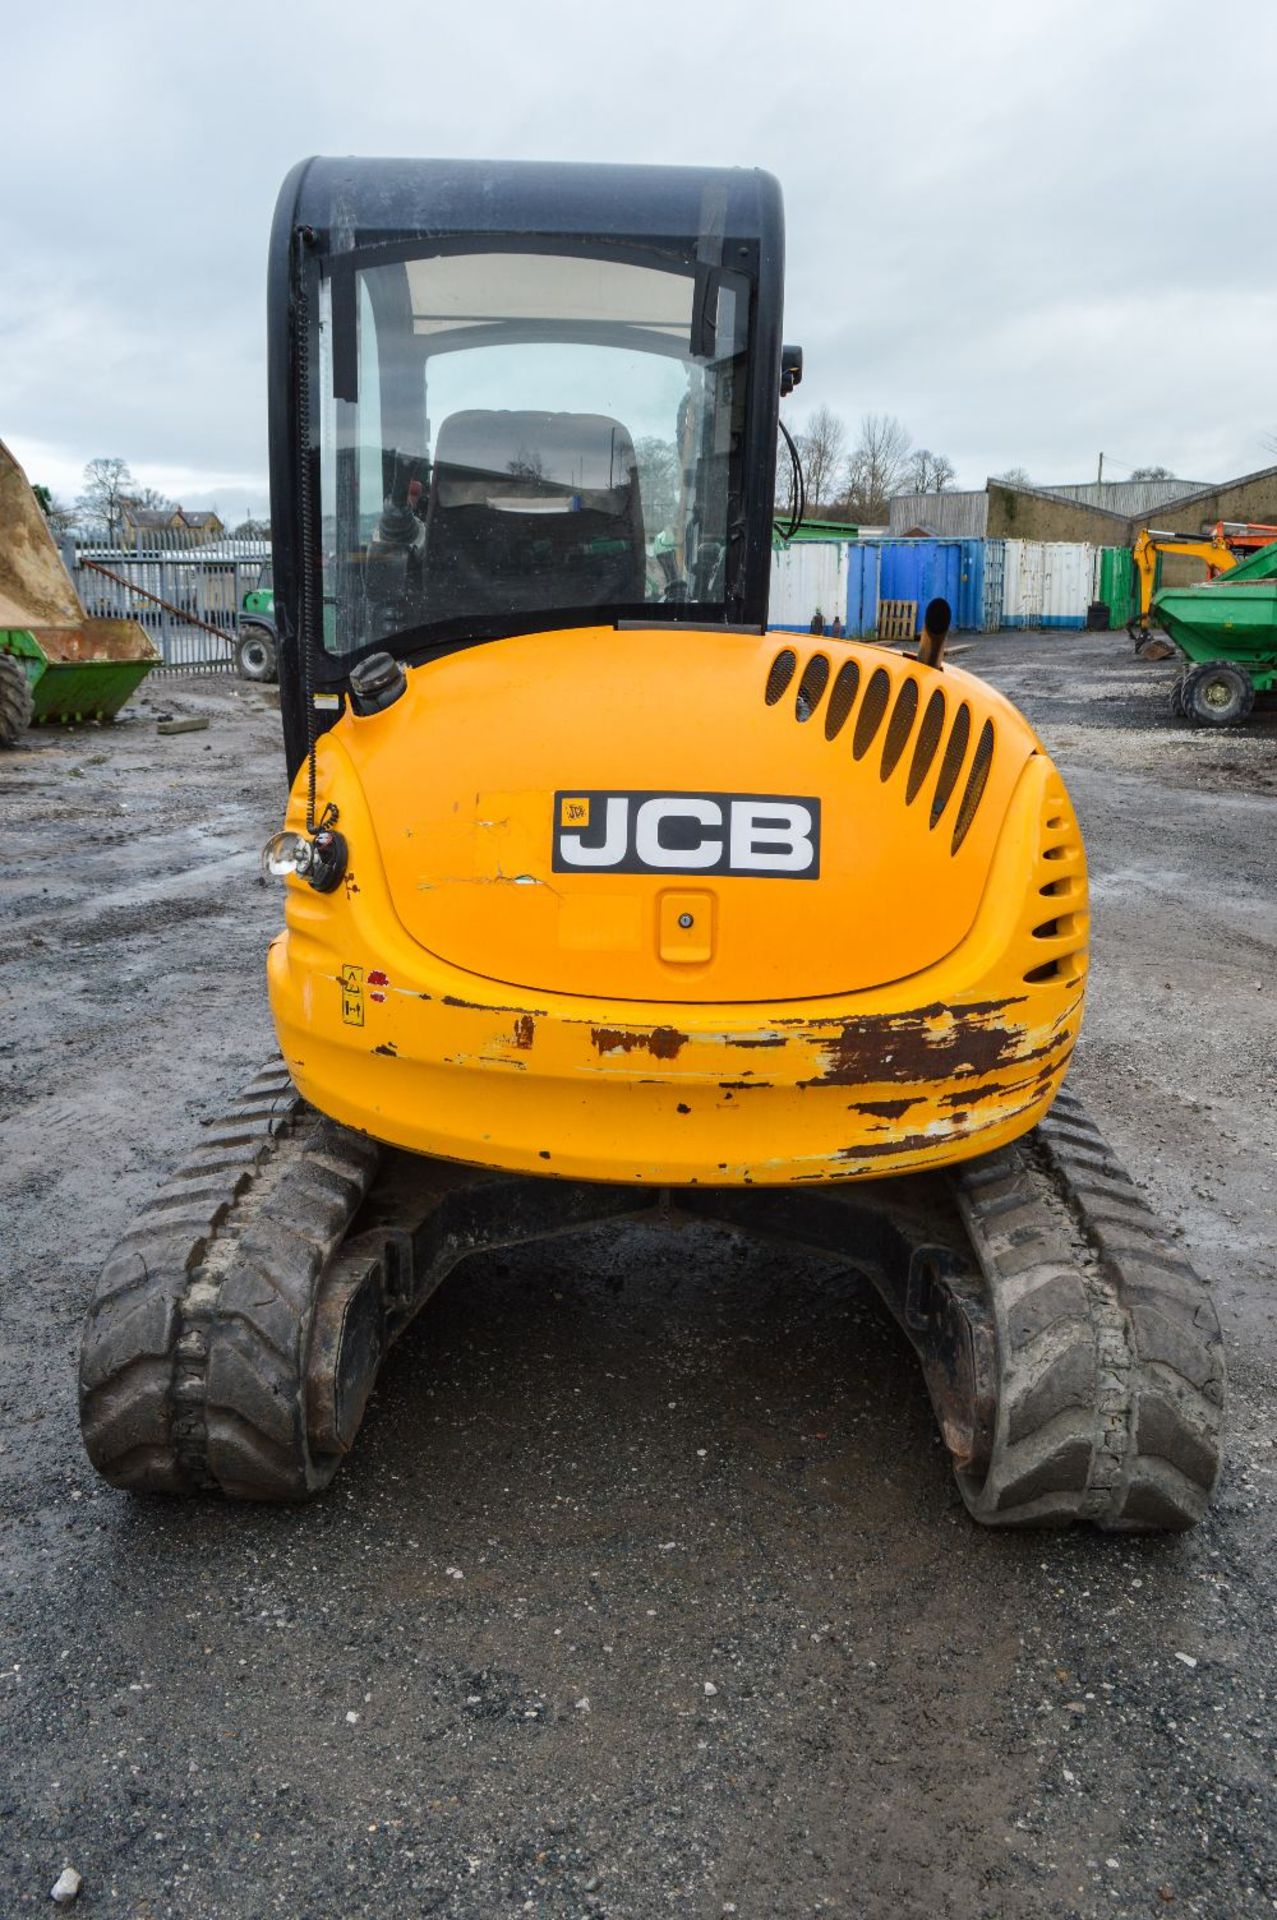 JCB 8050 RTS 5 tonne reduced tail swing rubber tracked mini excavator
Year: 2011
S/N: 1741664 - Image 6 of 12